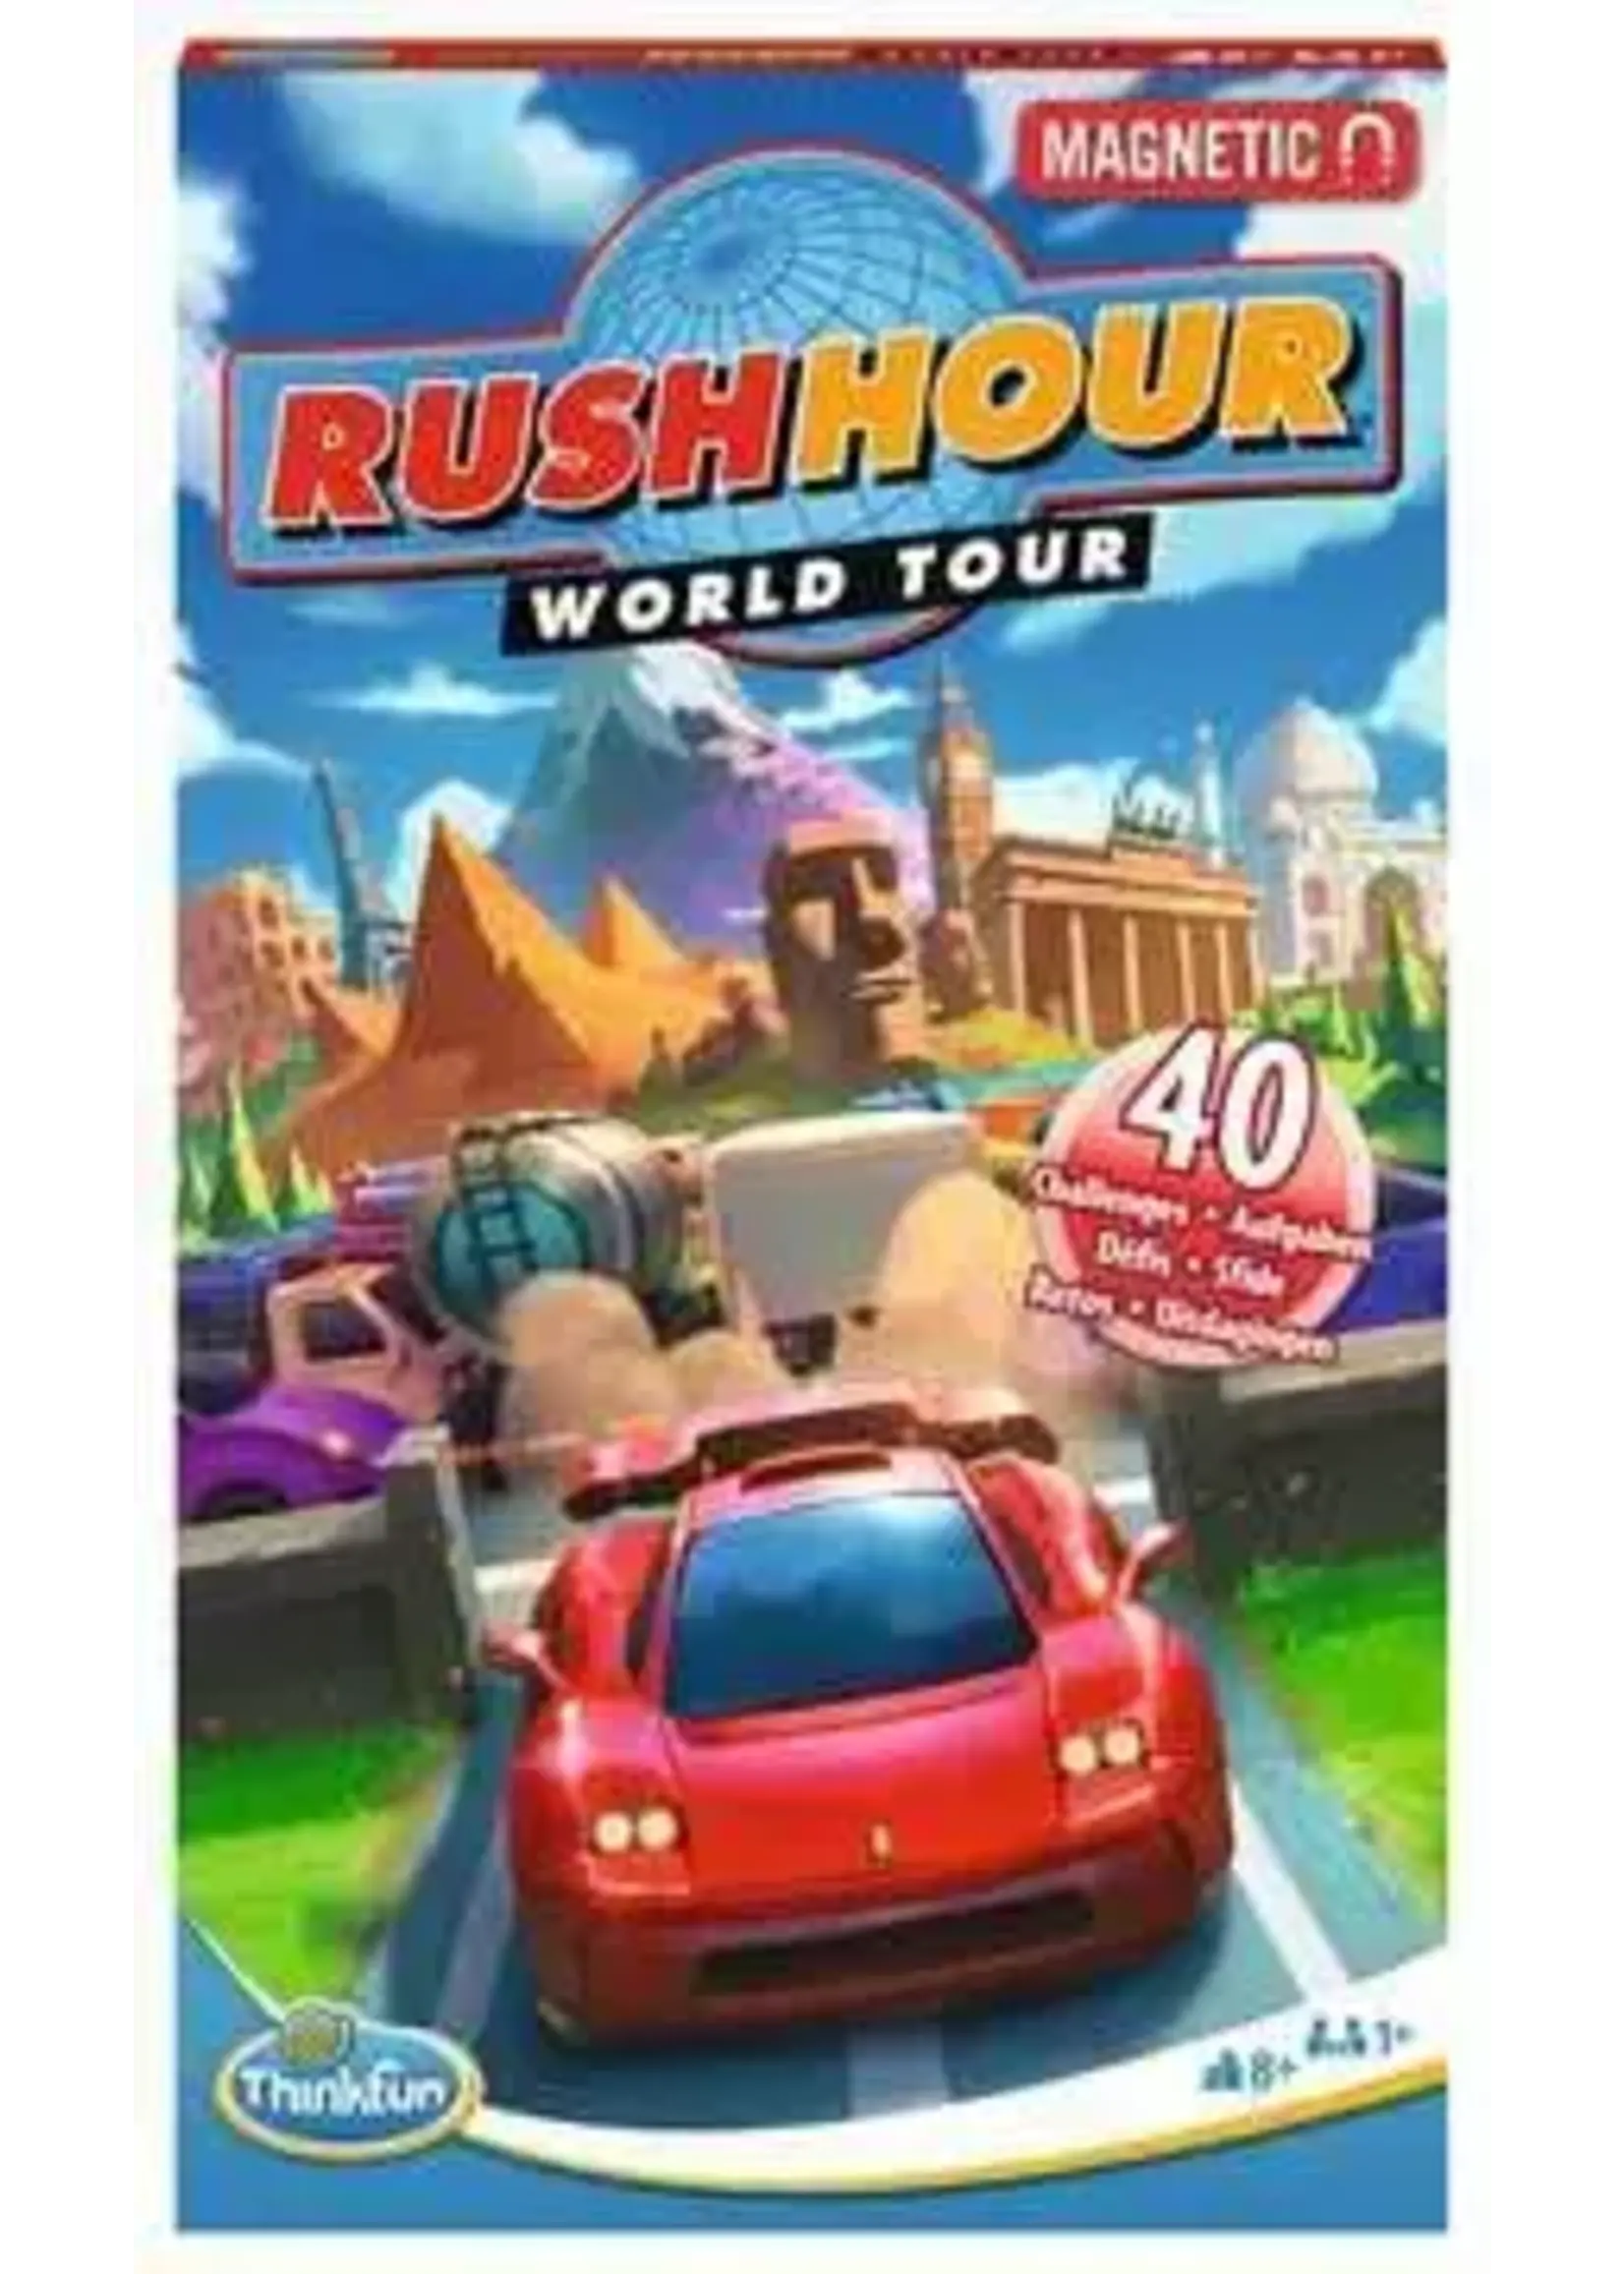 THF MAGNETIC PUZZLE RUSH HOUR WORLDTOUR